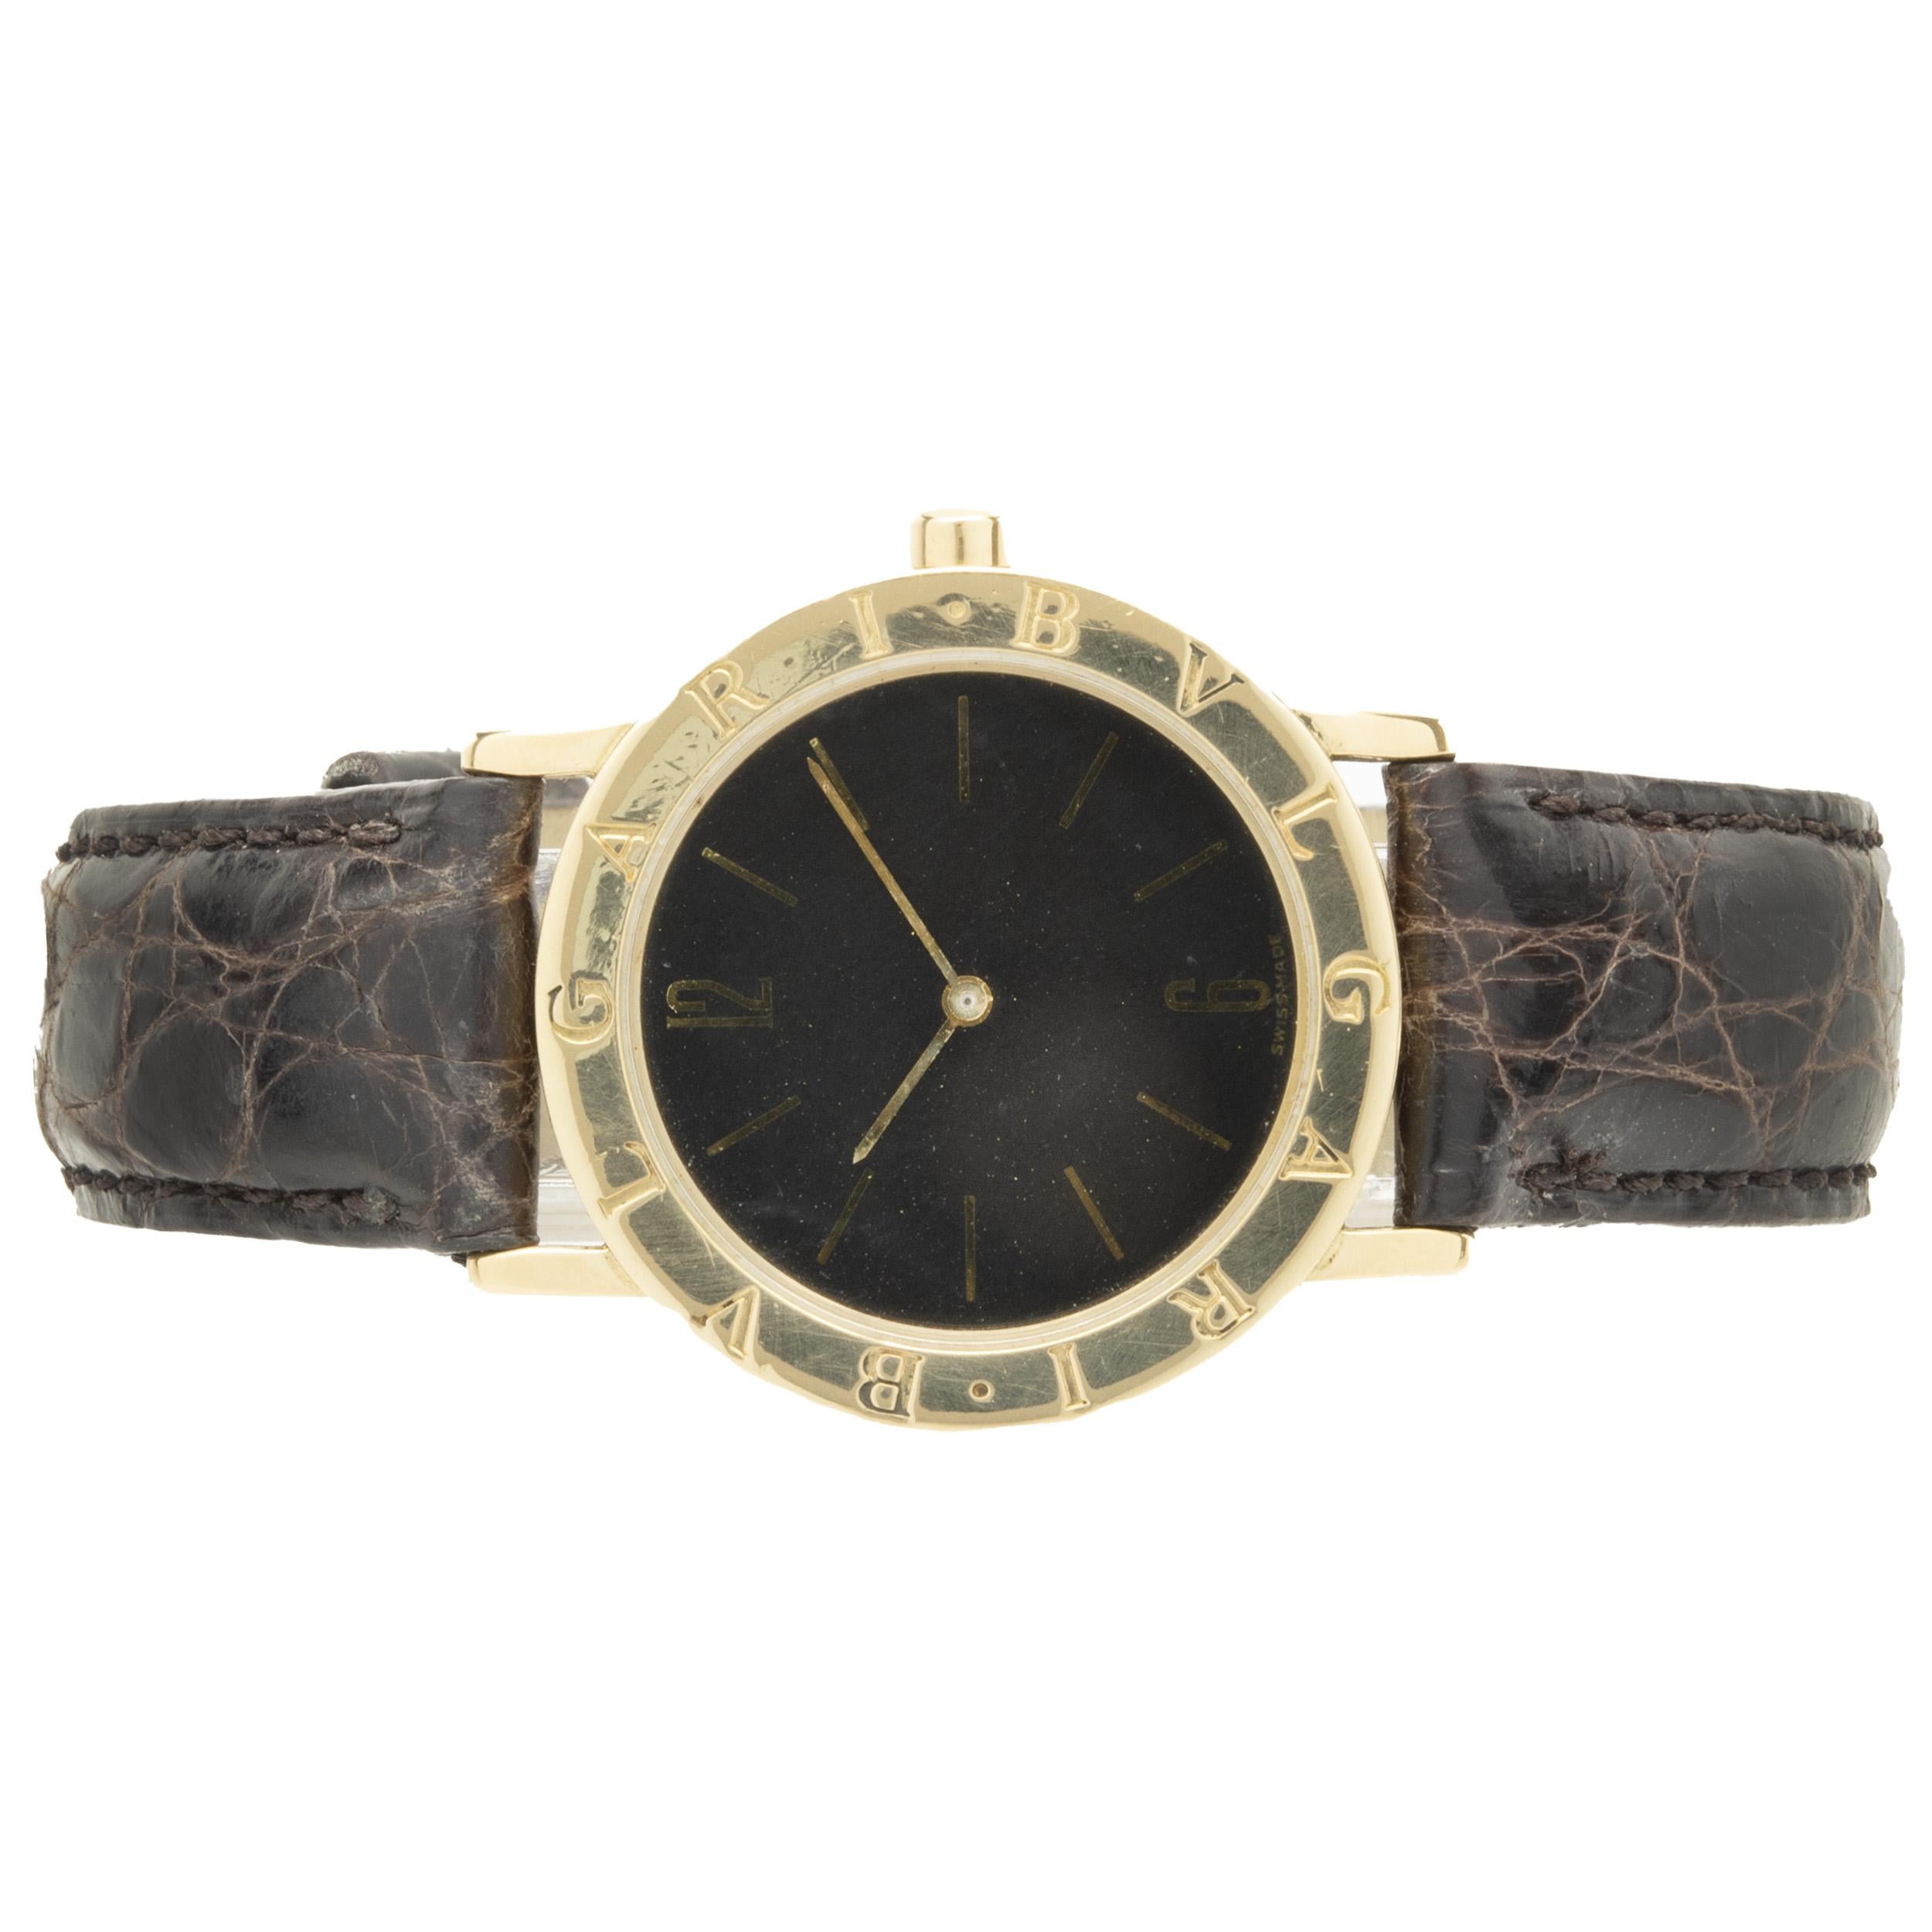 Movement: automatic
Function: hours, minutes
Case: 33mm round case, smooth Bulgari bezel, sapphire crystal
Band: Bulgari leather strap, buckle clasp
Dial: black 
Serial #: D.68XXX
Reference #: BB33GL

No box or papers included
Guaranteed to be